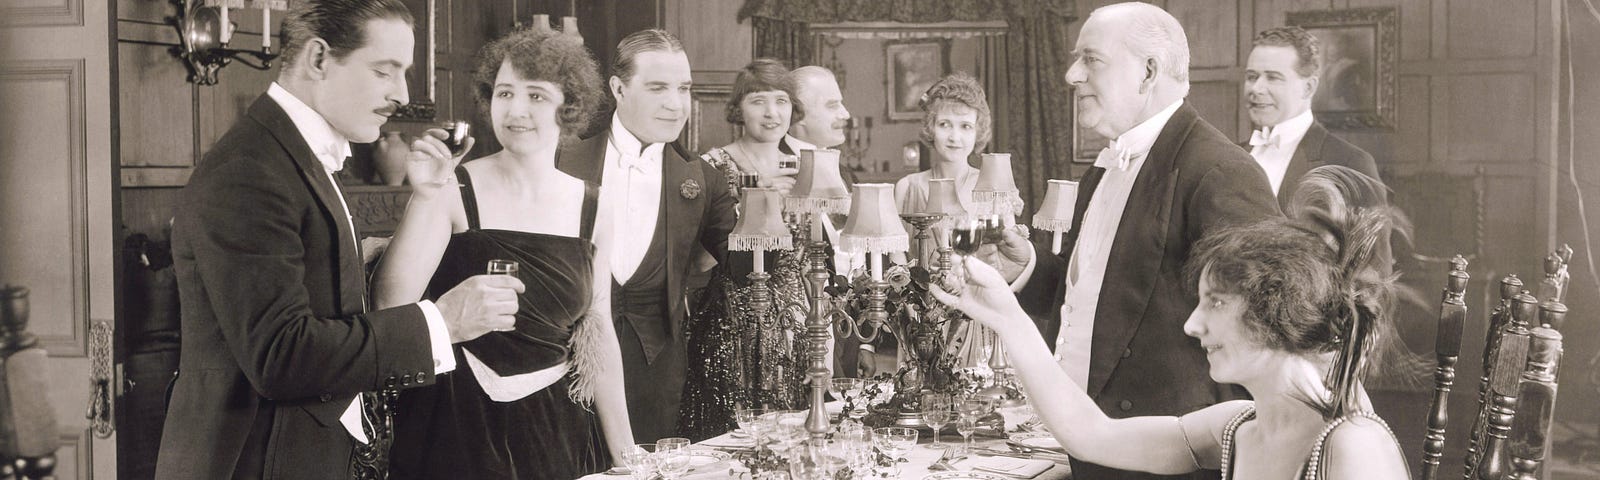 Vintage photo of black and white dinner party where the husband is being toasted by the guests